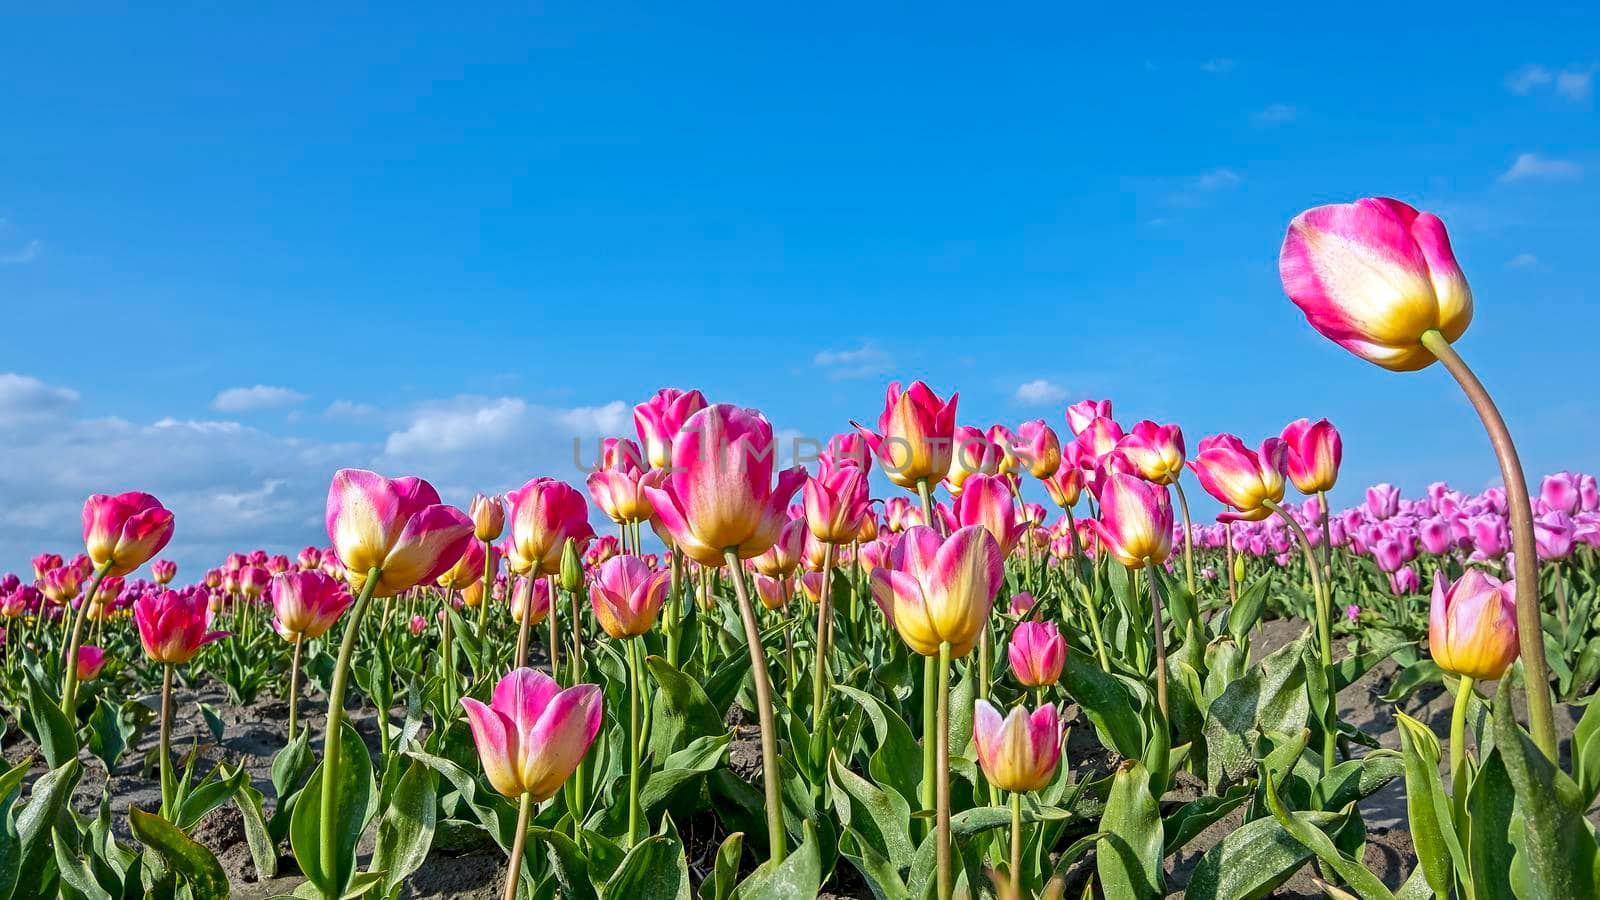 Blossoming purple tulips in the countryside from the Netherlands by devy